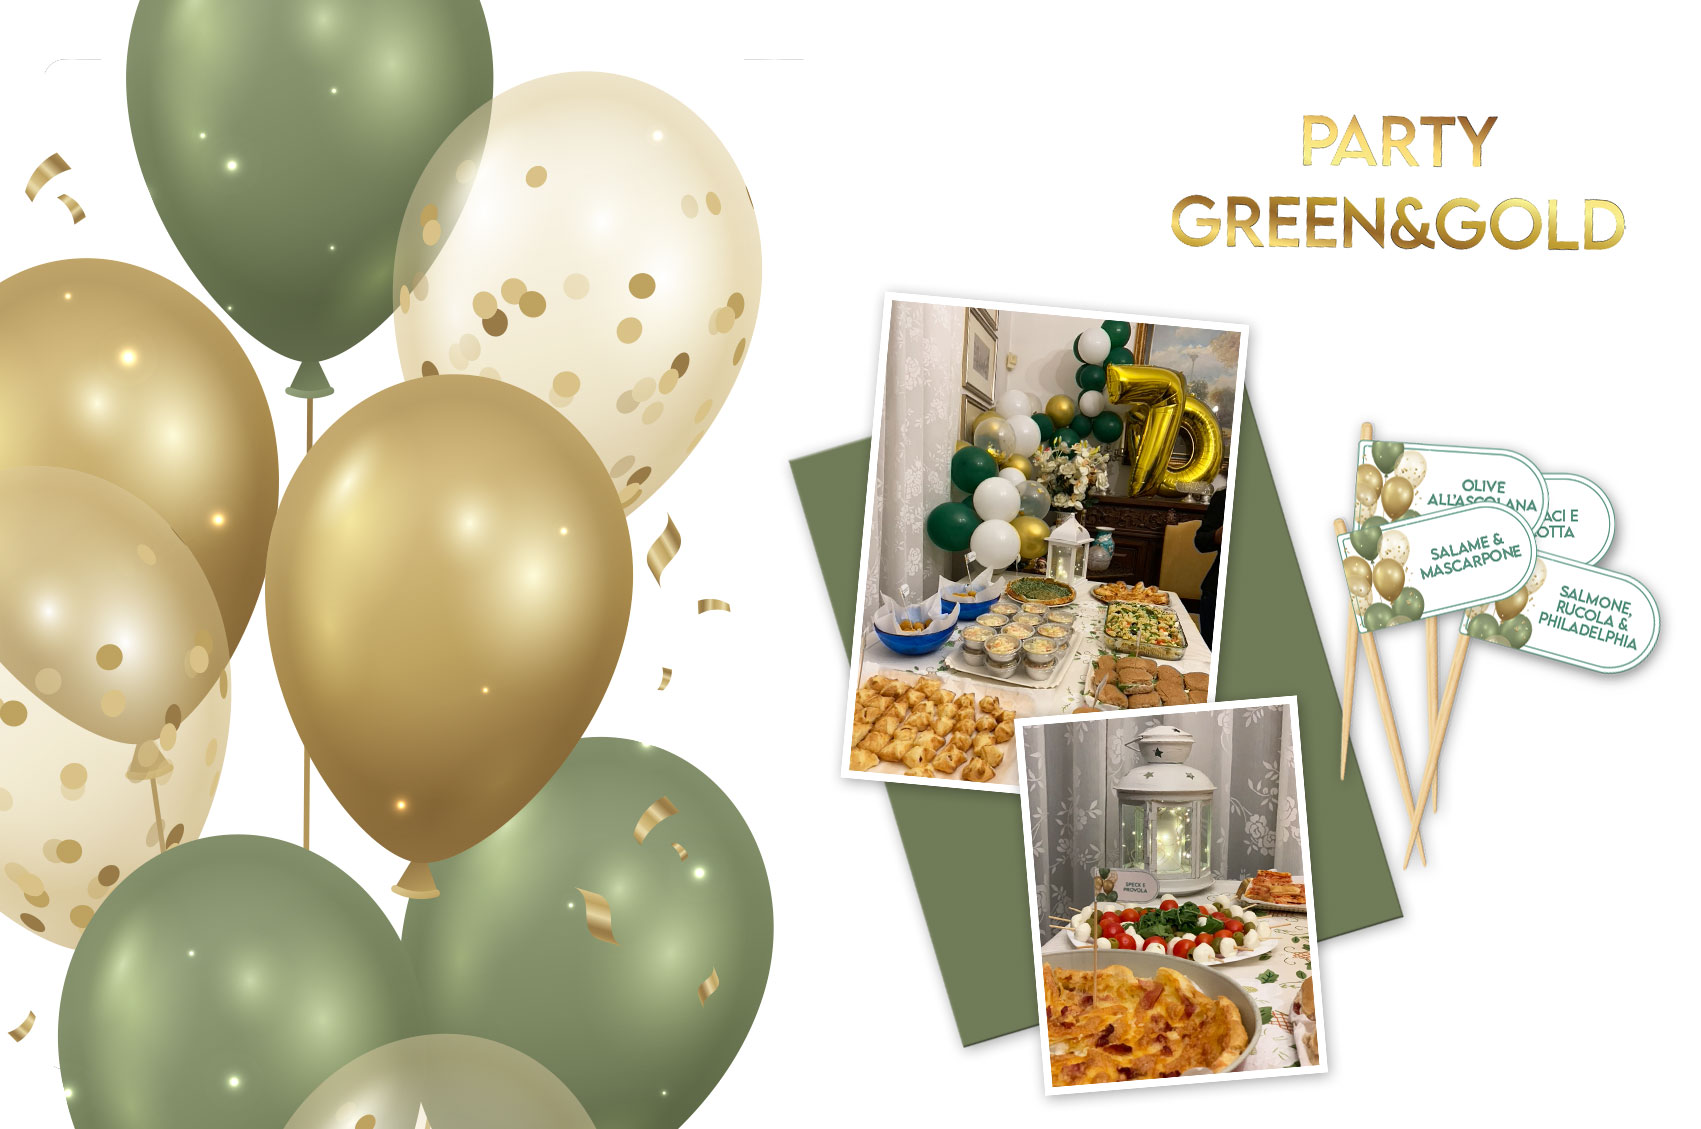 Party-green&gold